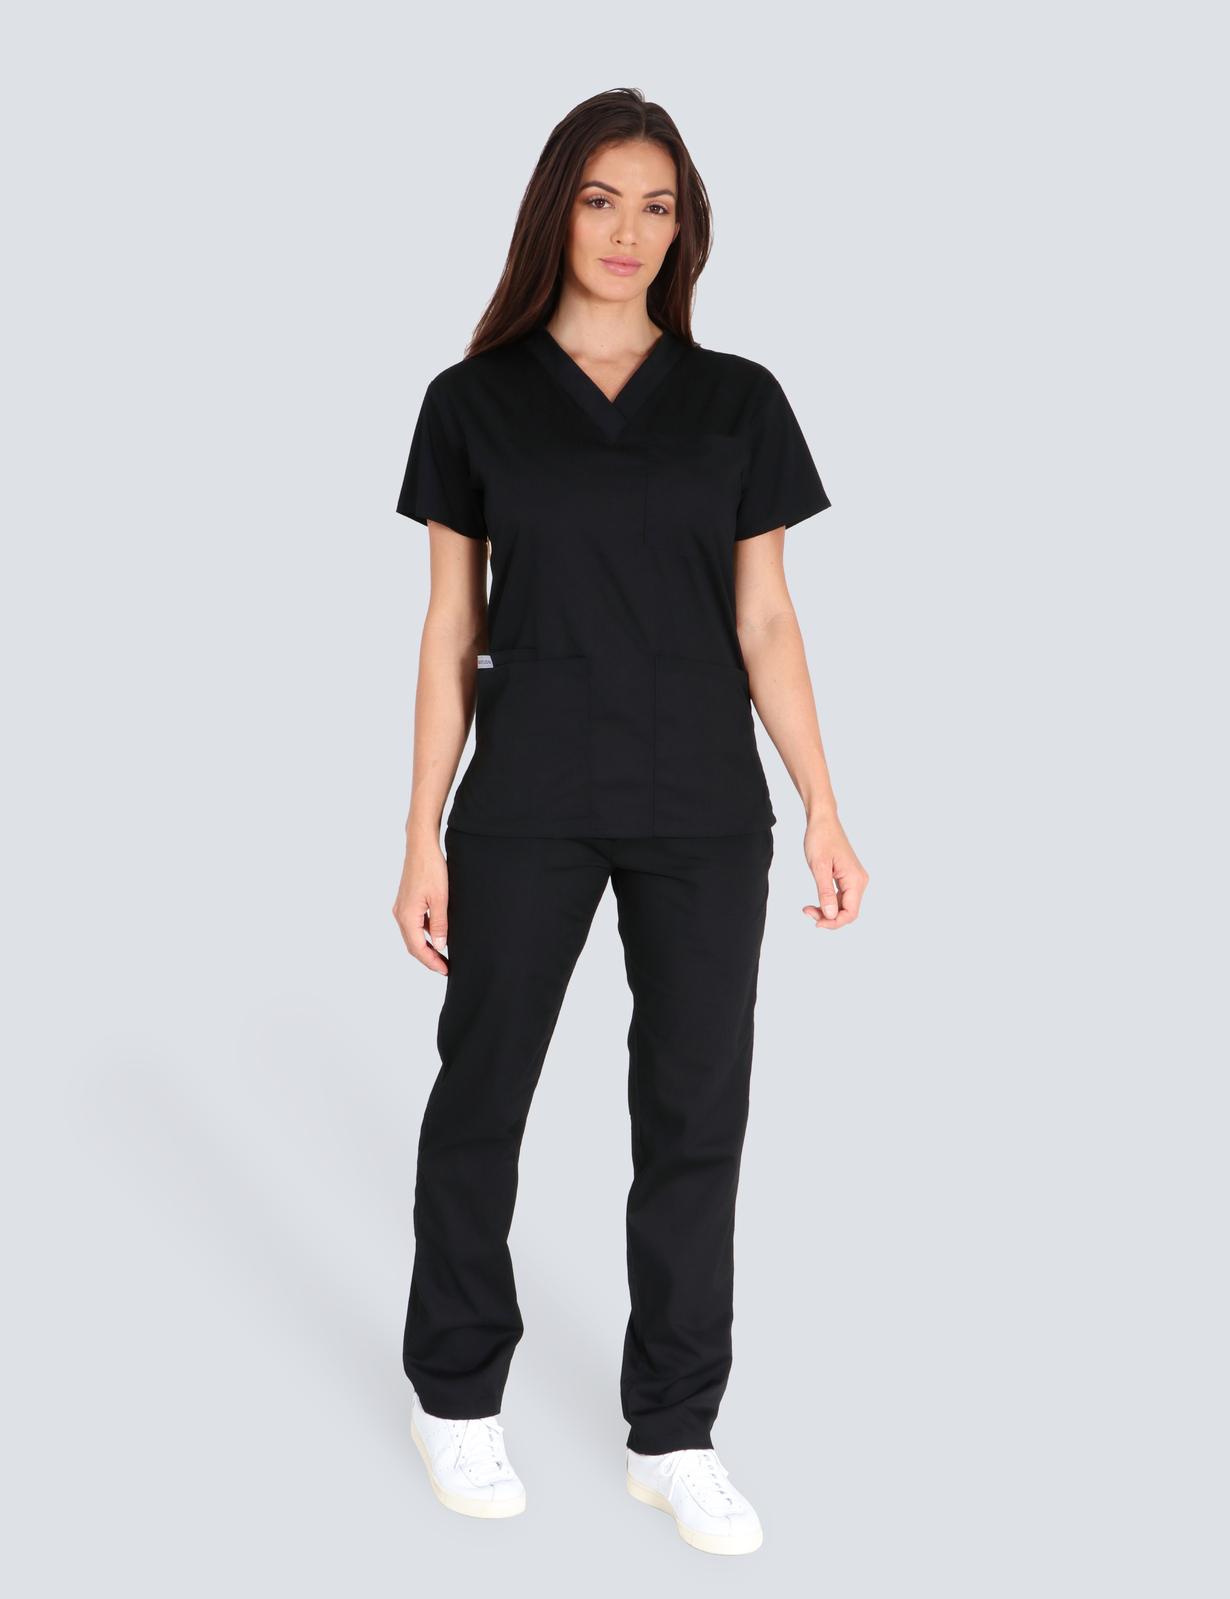 Prince Charles Hospital - Medical Imaging (4 Pocket Top and Cargo Pants in Black incl Logos)